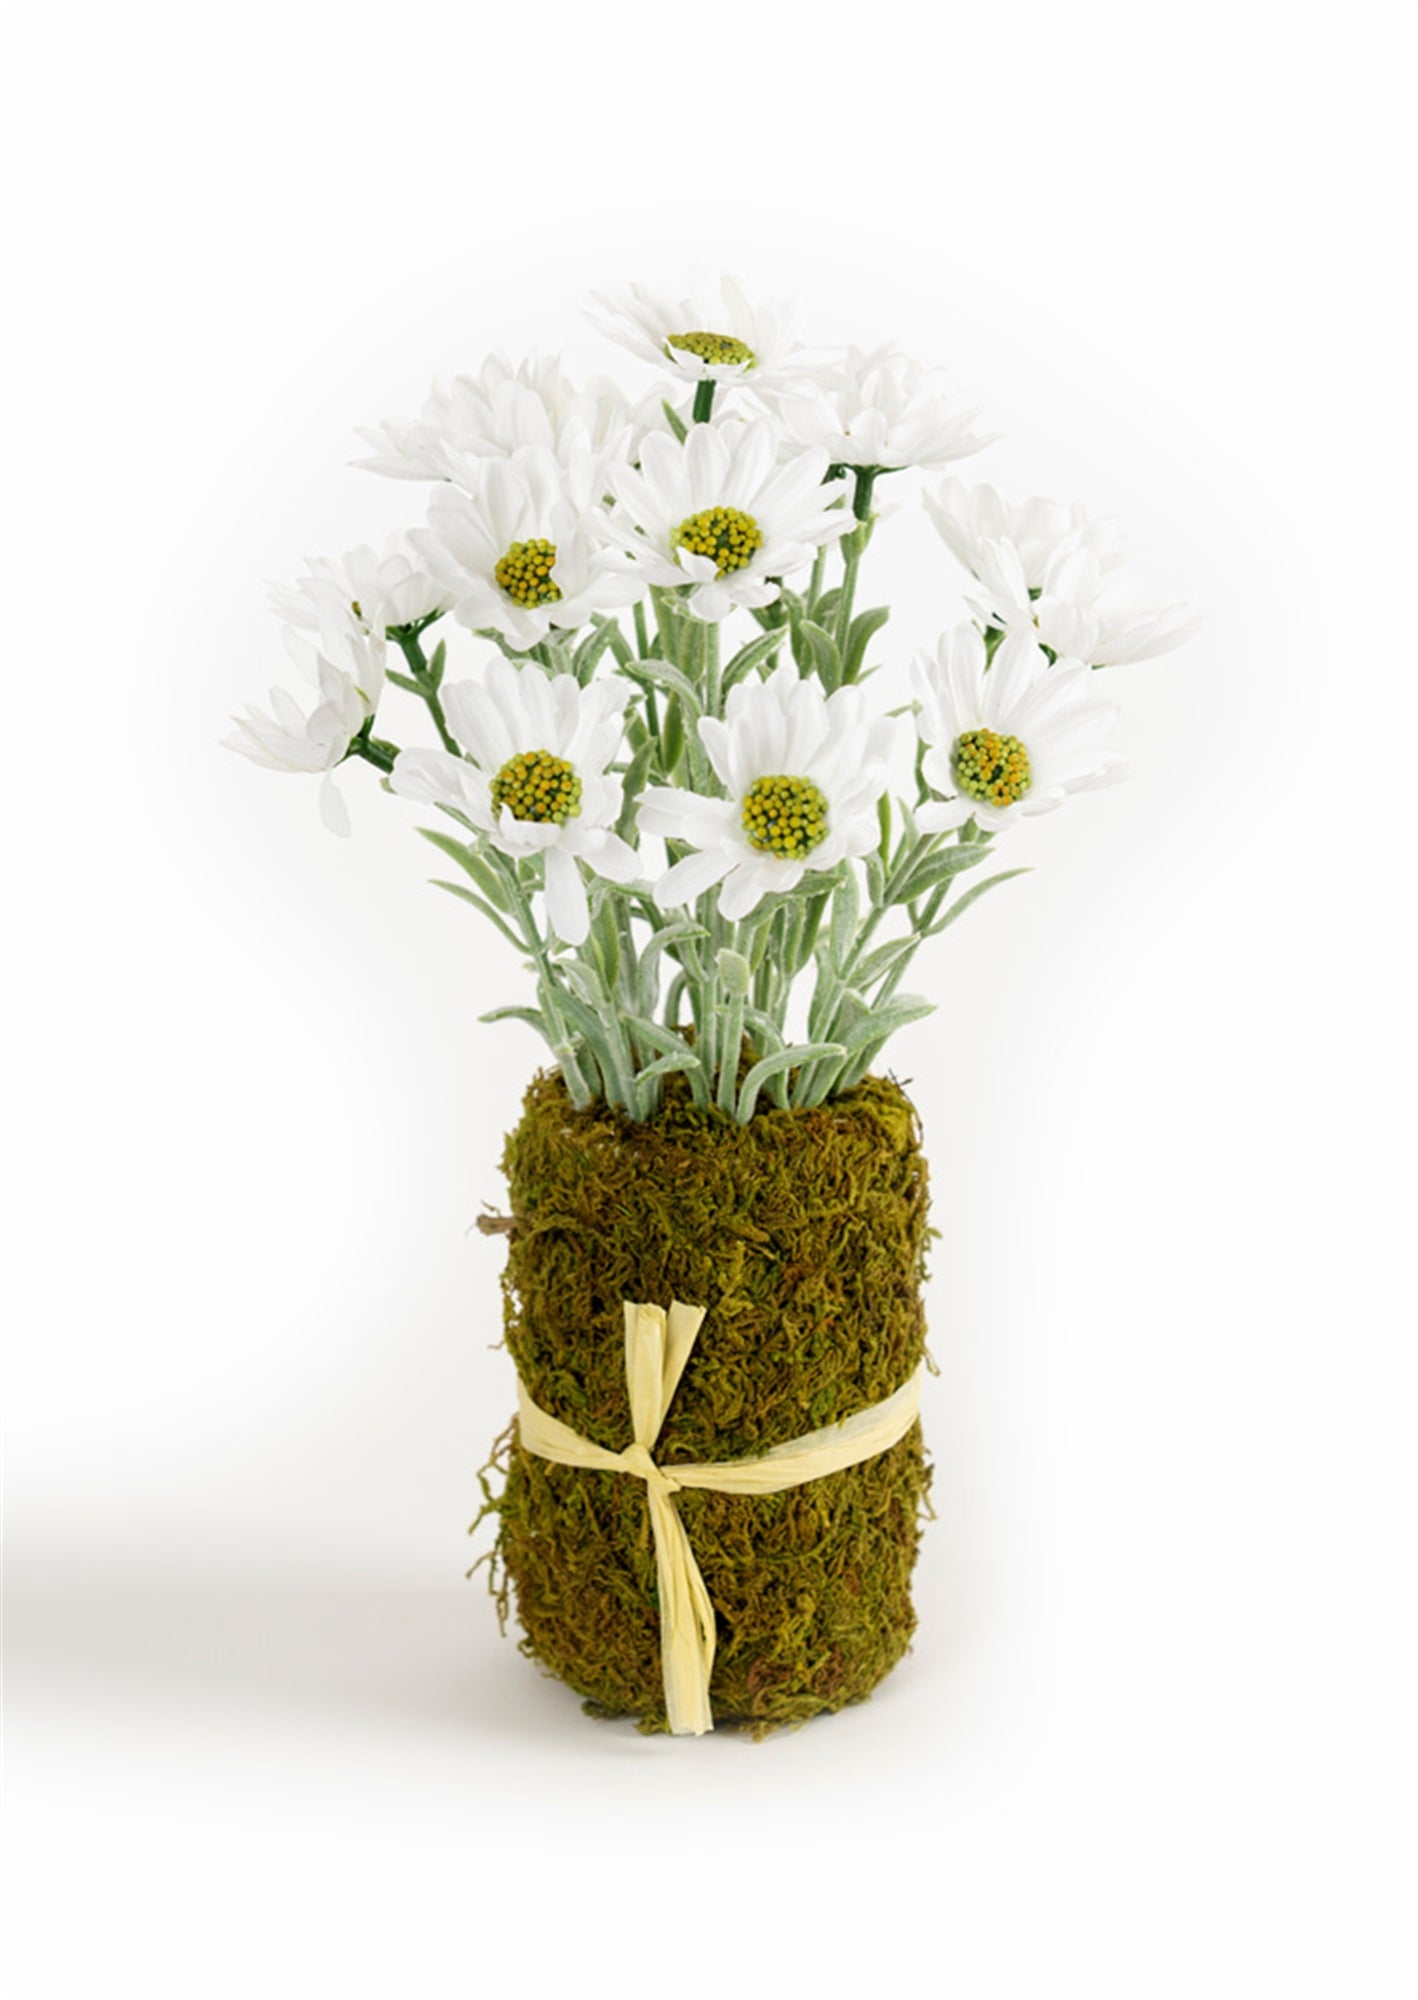 Daisy Floral Vase Insert with Moss Base (Set of 6)